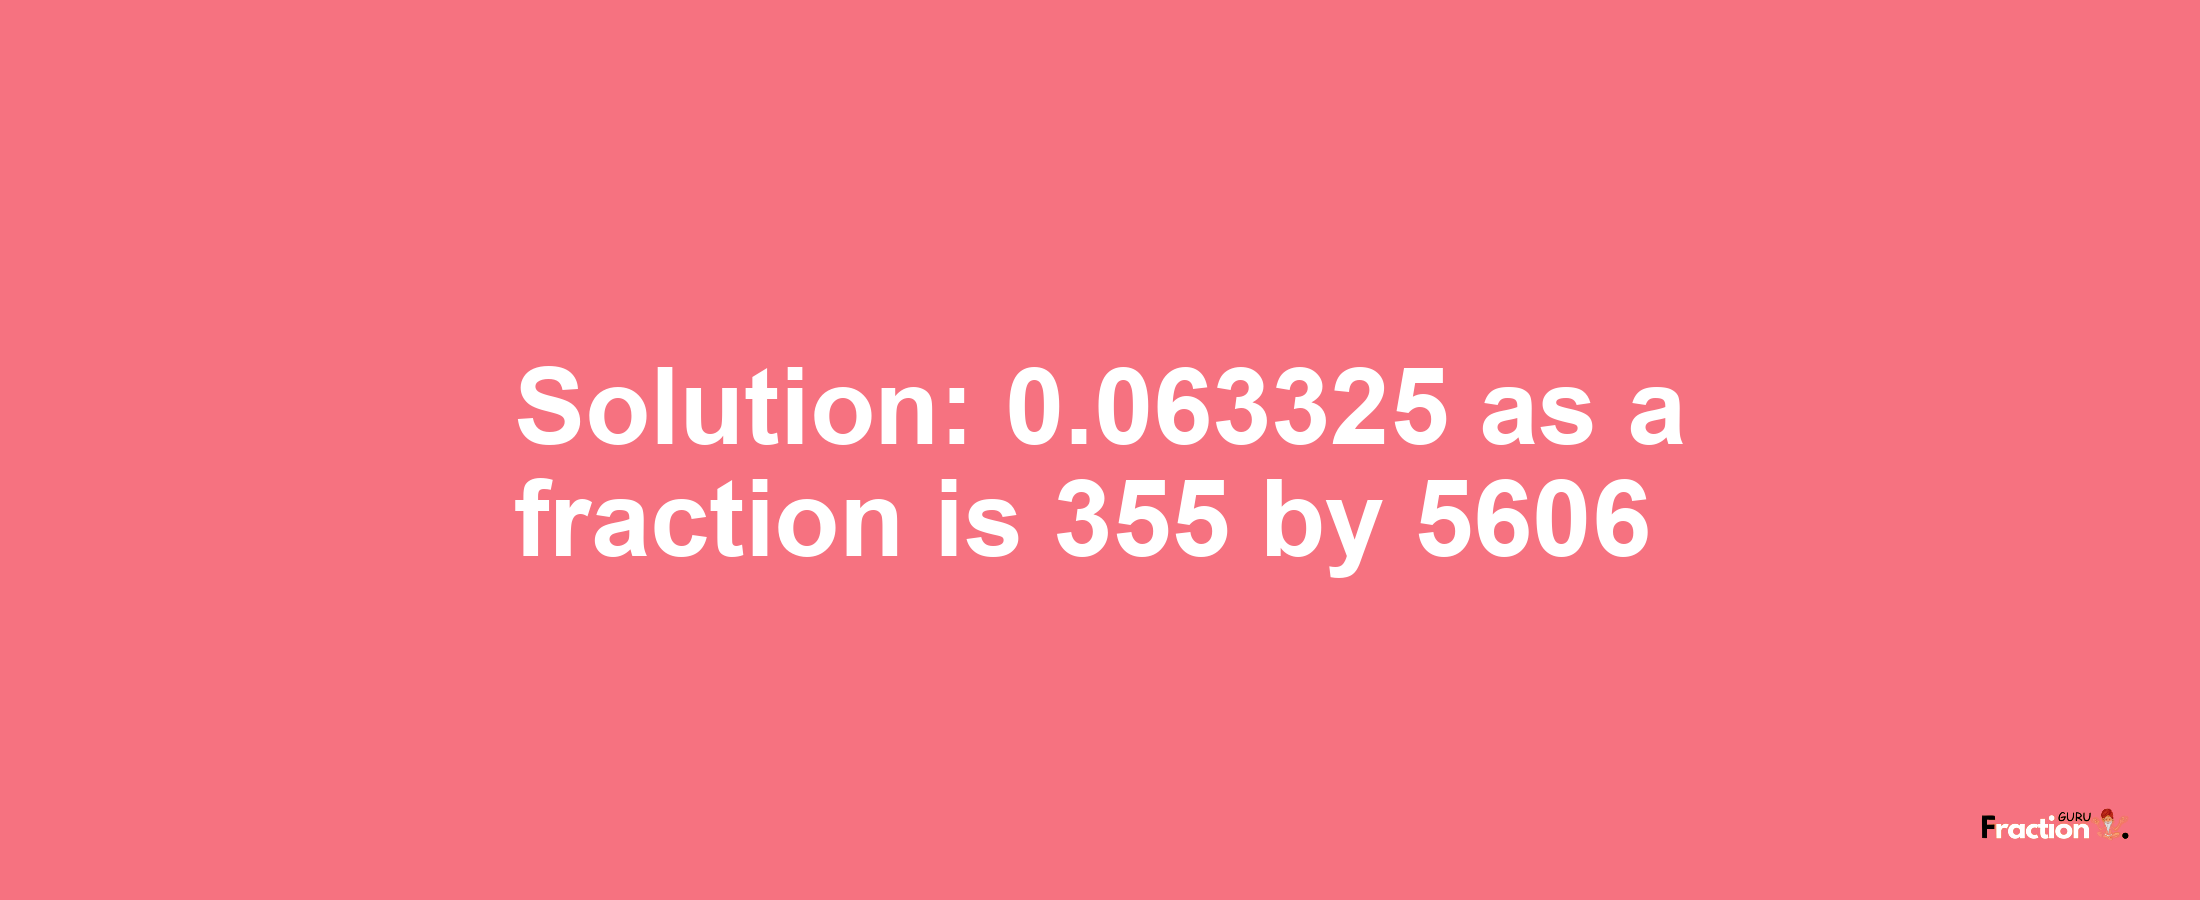 Solution:0.063325 as a fraction is 355/5606